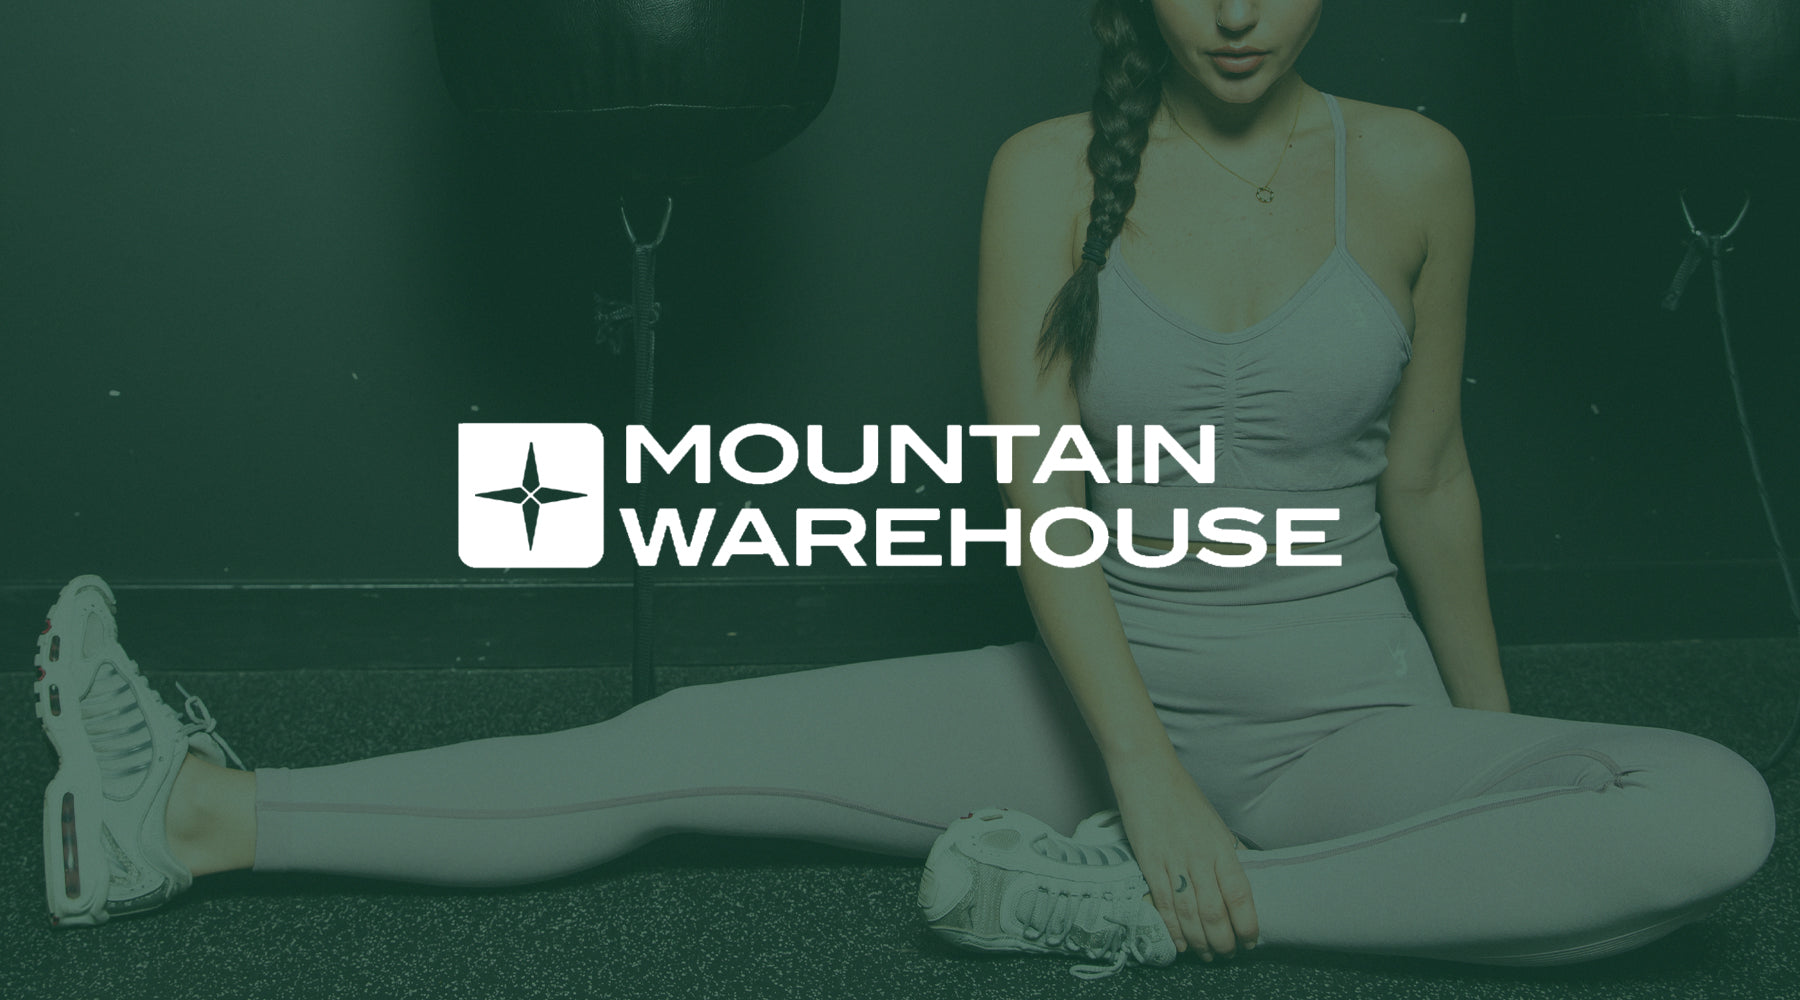 Mountain Warehouse partner with v3 apparel womens activewear, gym clothing and fitness workout clothes providing seamless scrunch leggings and sports bras